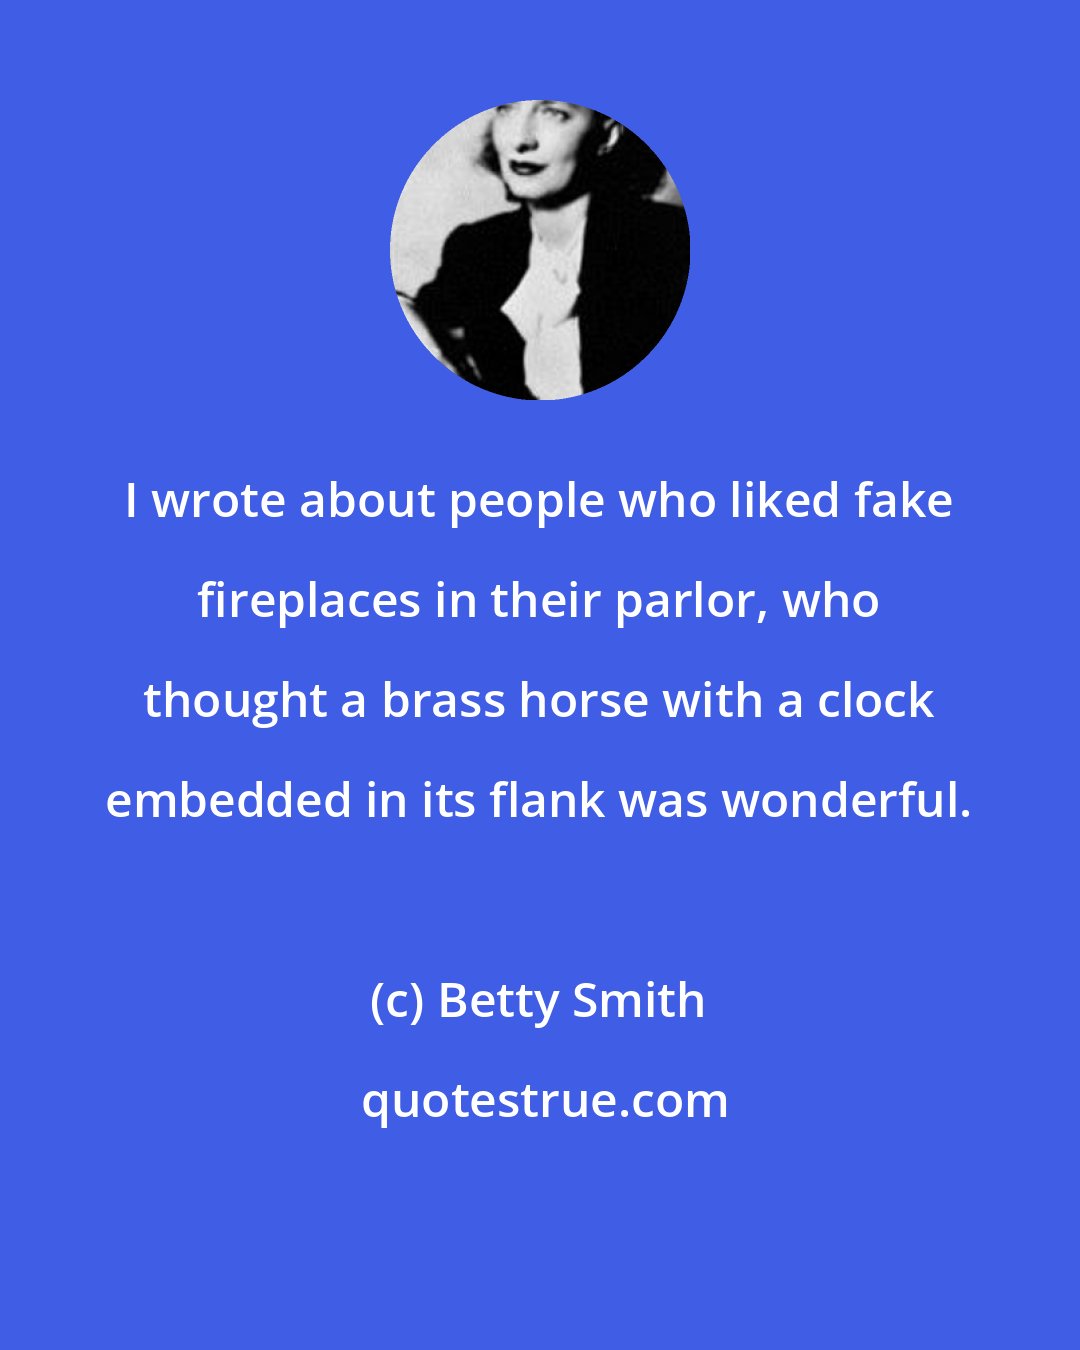 Betty Smith: I wrote about people who liked fake fireplaces in their parlor, who thought a brass horse with a clock embedded in its flank was wonderful.